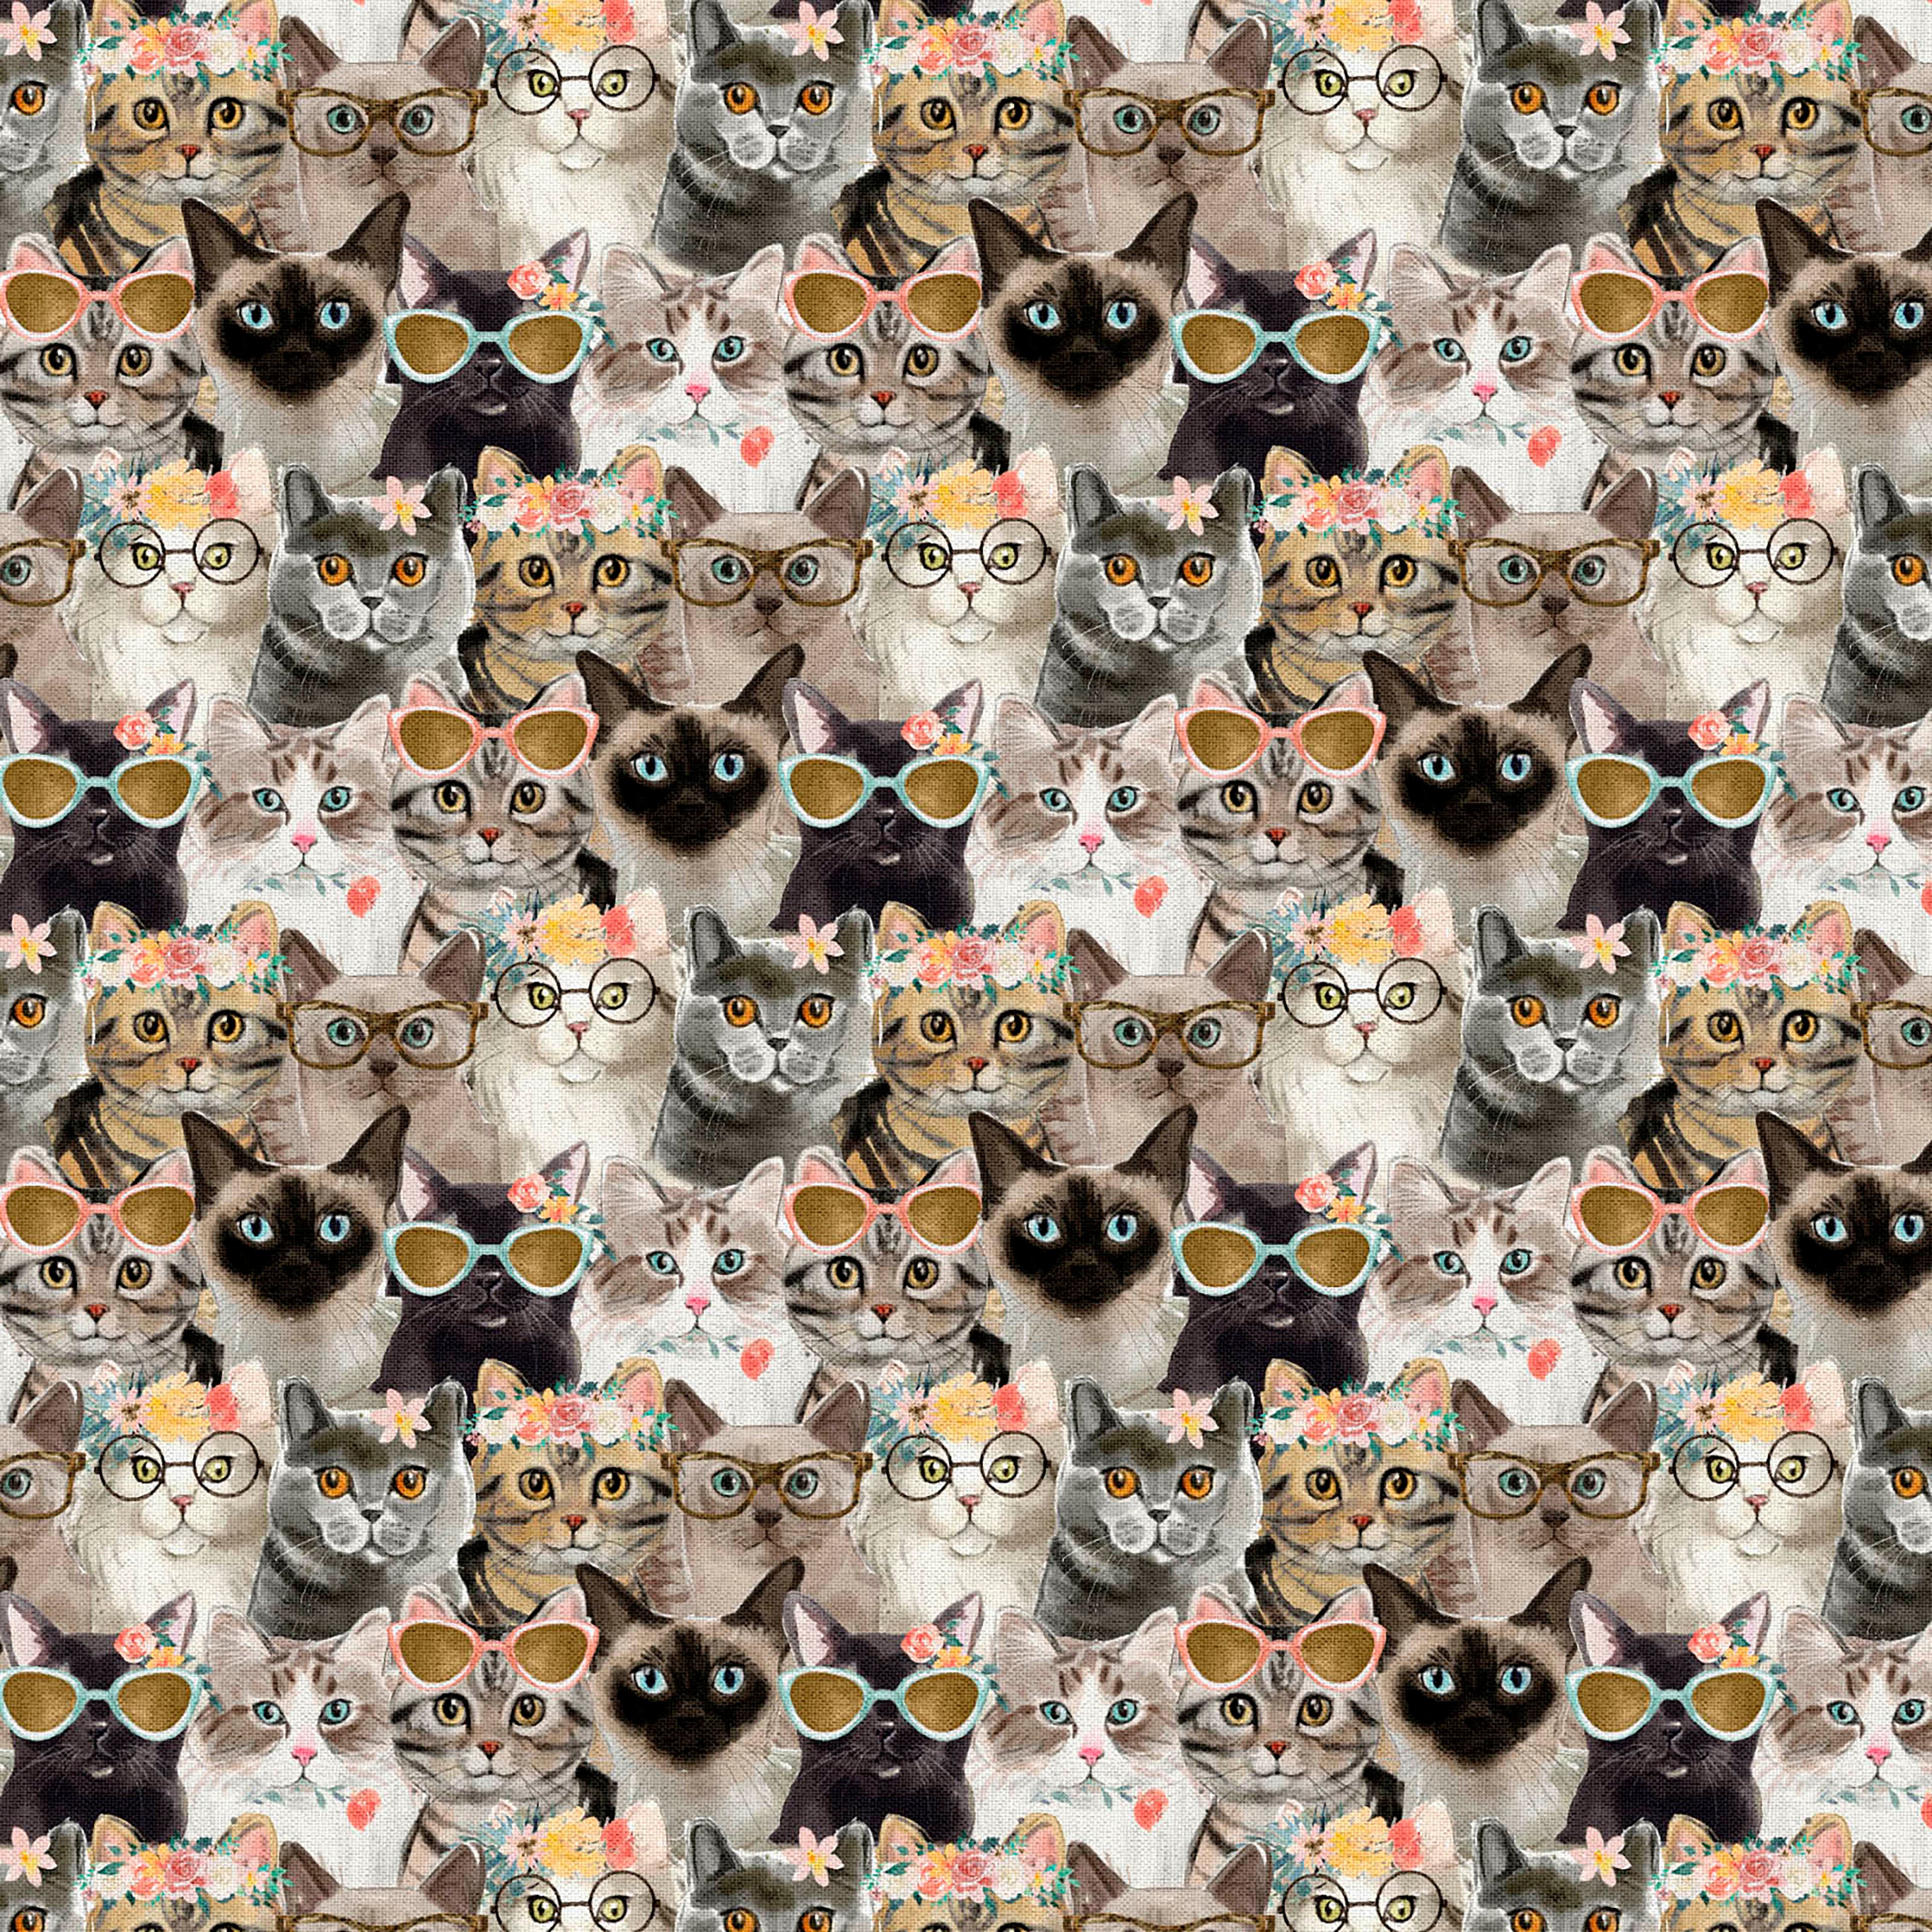 Fabric Editions Cool Kittens Cotton Fabric